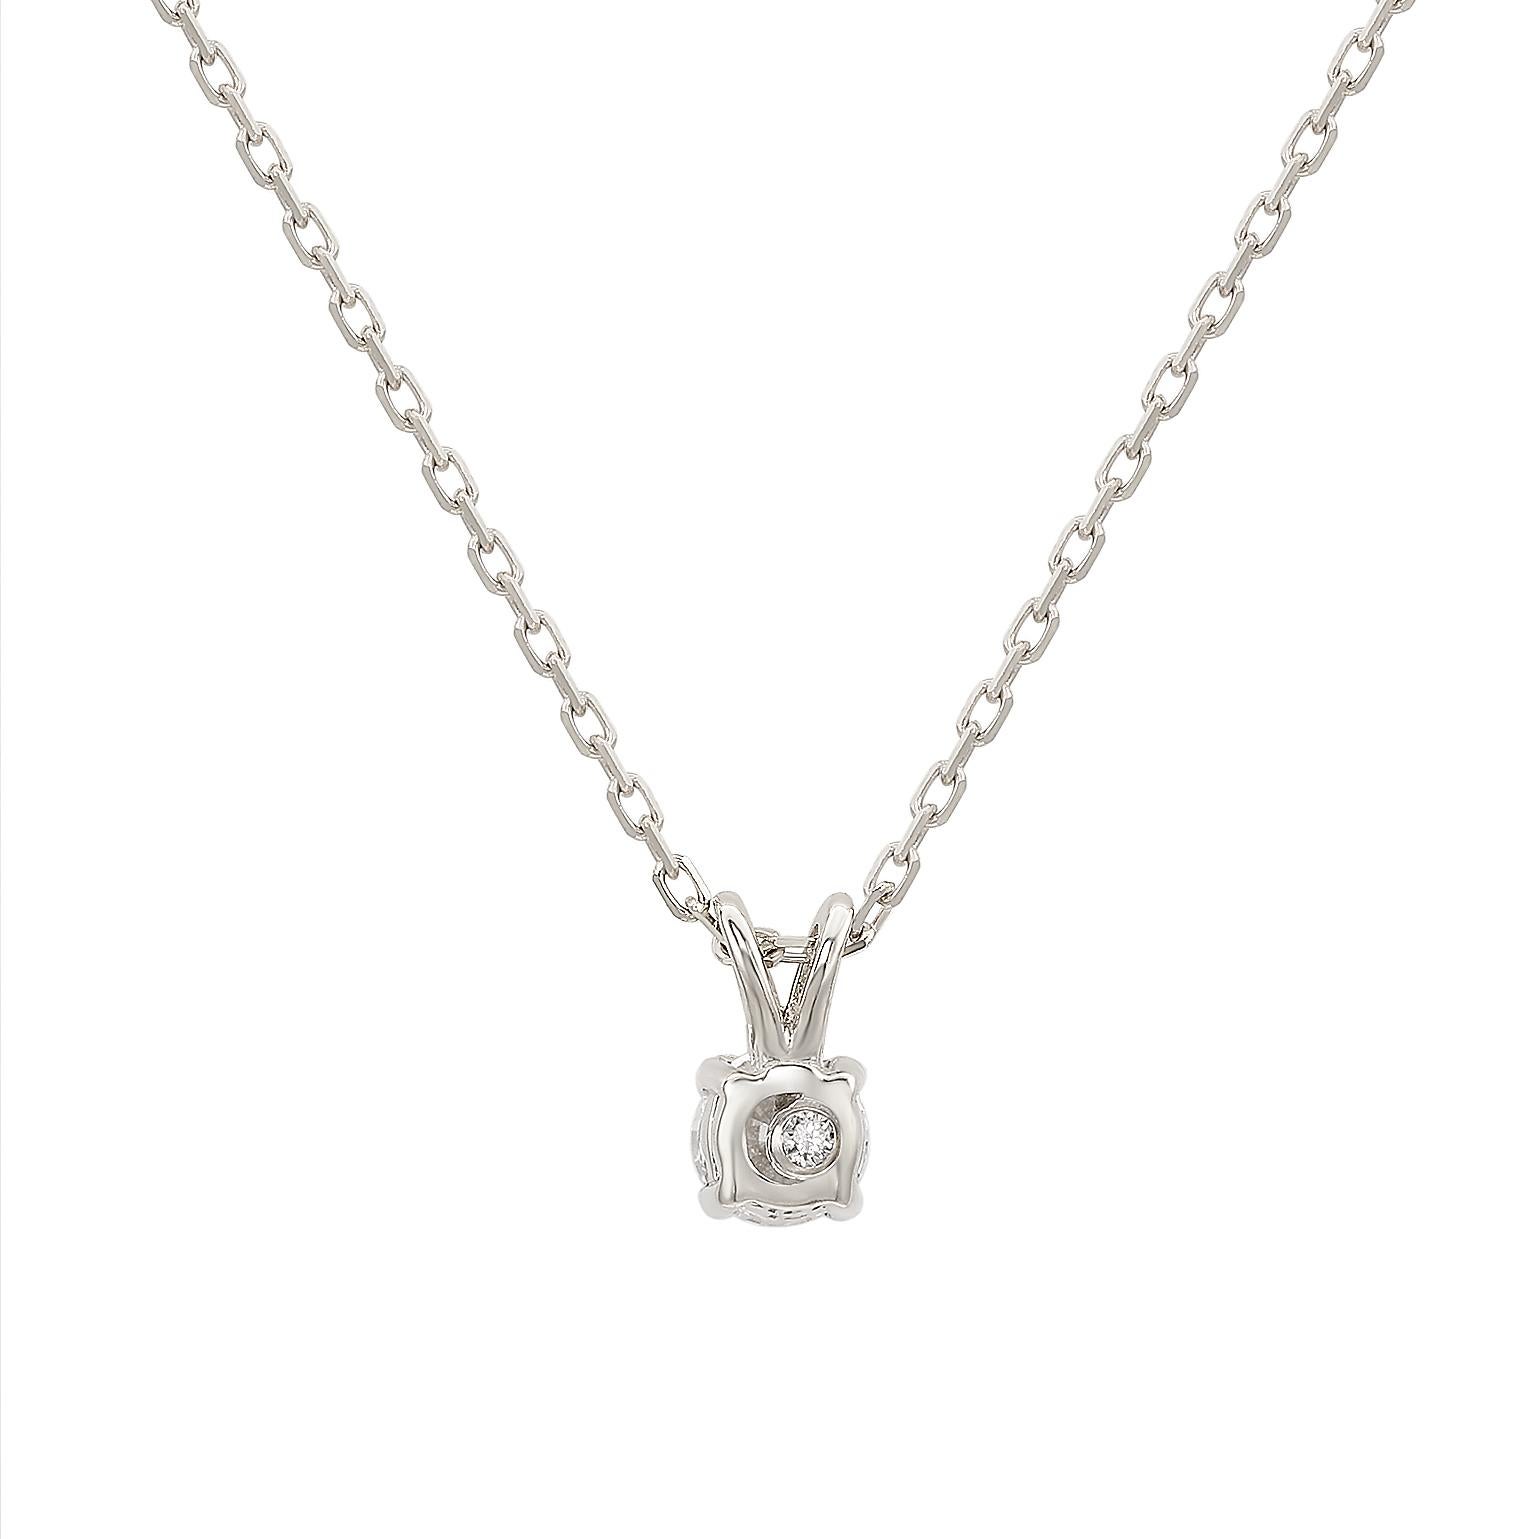 Add an elegant accent to your outfit with this sparkling Suzy Levian solitaire pendant necklace featuring a single gorgeous white diamonds in a split bail prong setting. The sparkling diamond are hand set in 14-karat white gold, and weigh 0.15ctw